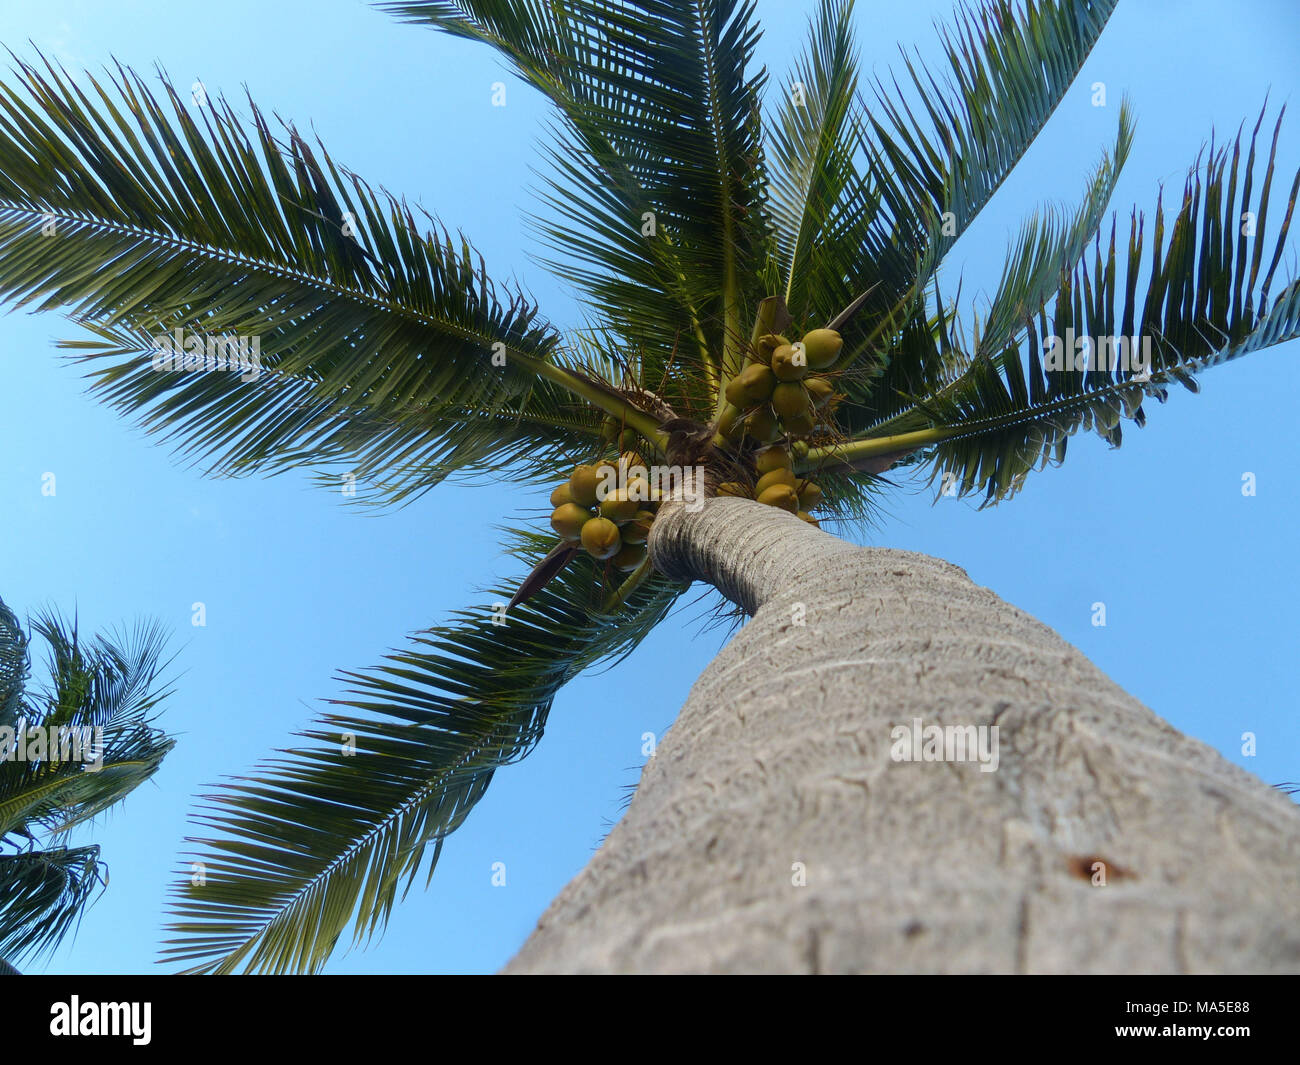 Coconut palm tree with ripe coconuts. Falling coconuts kill more people each year than sharks Stock Photo